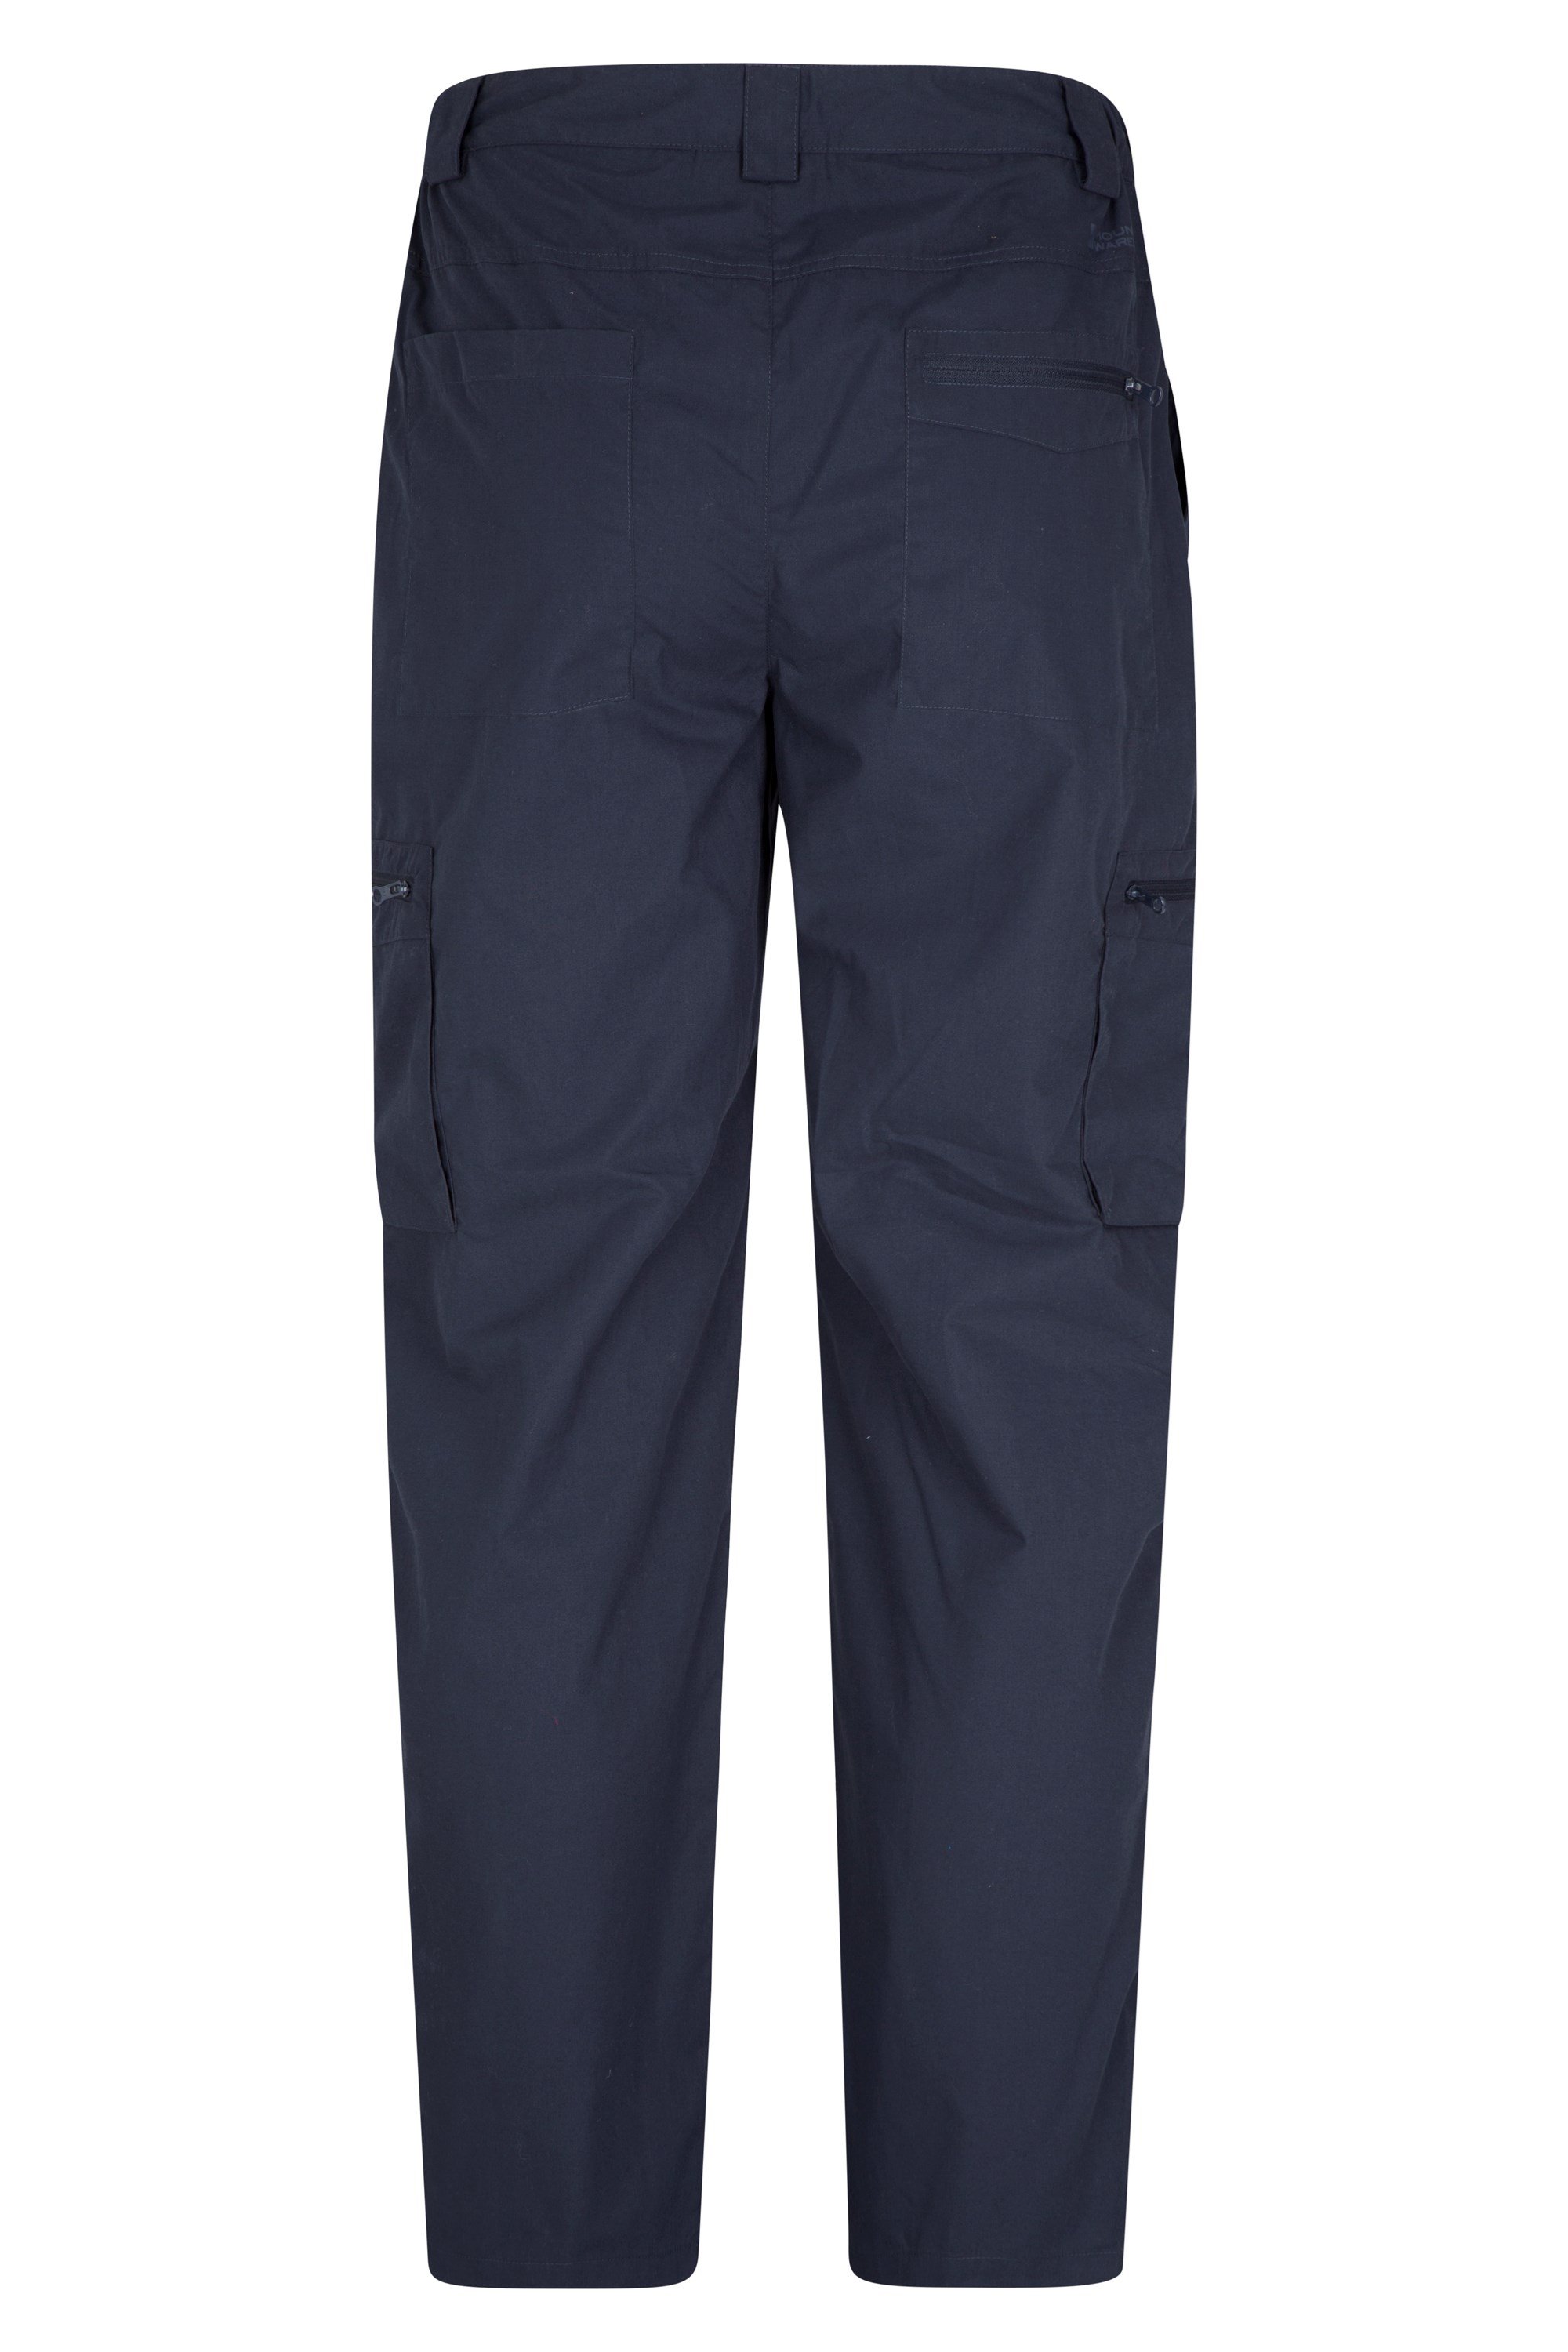 Kids insulated trousers – Buy insulated trousers – JACK WOLFSKIN